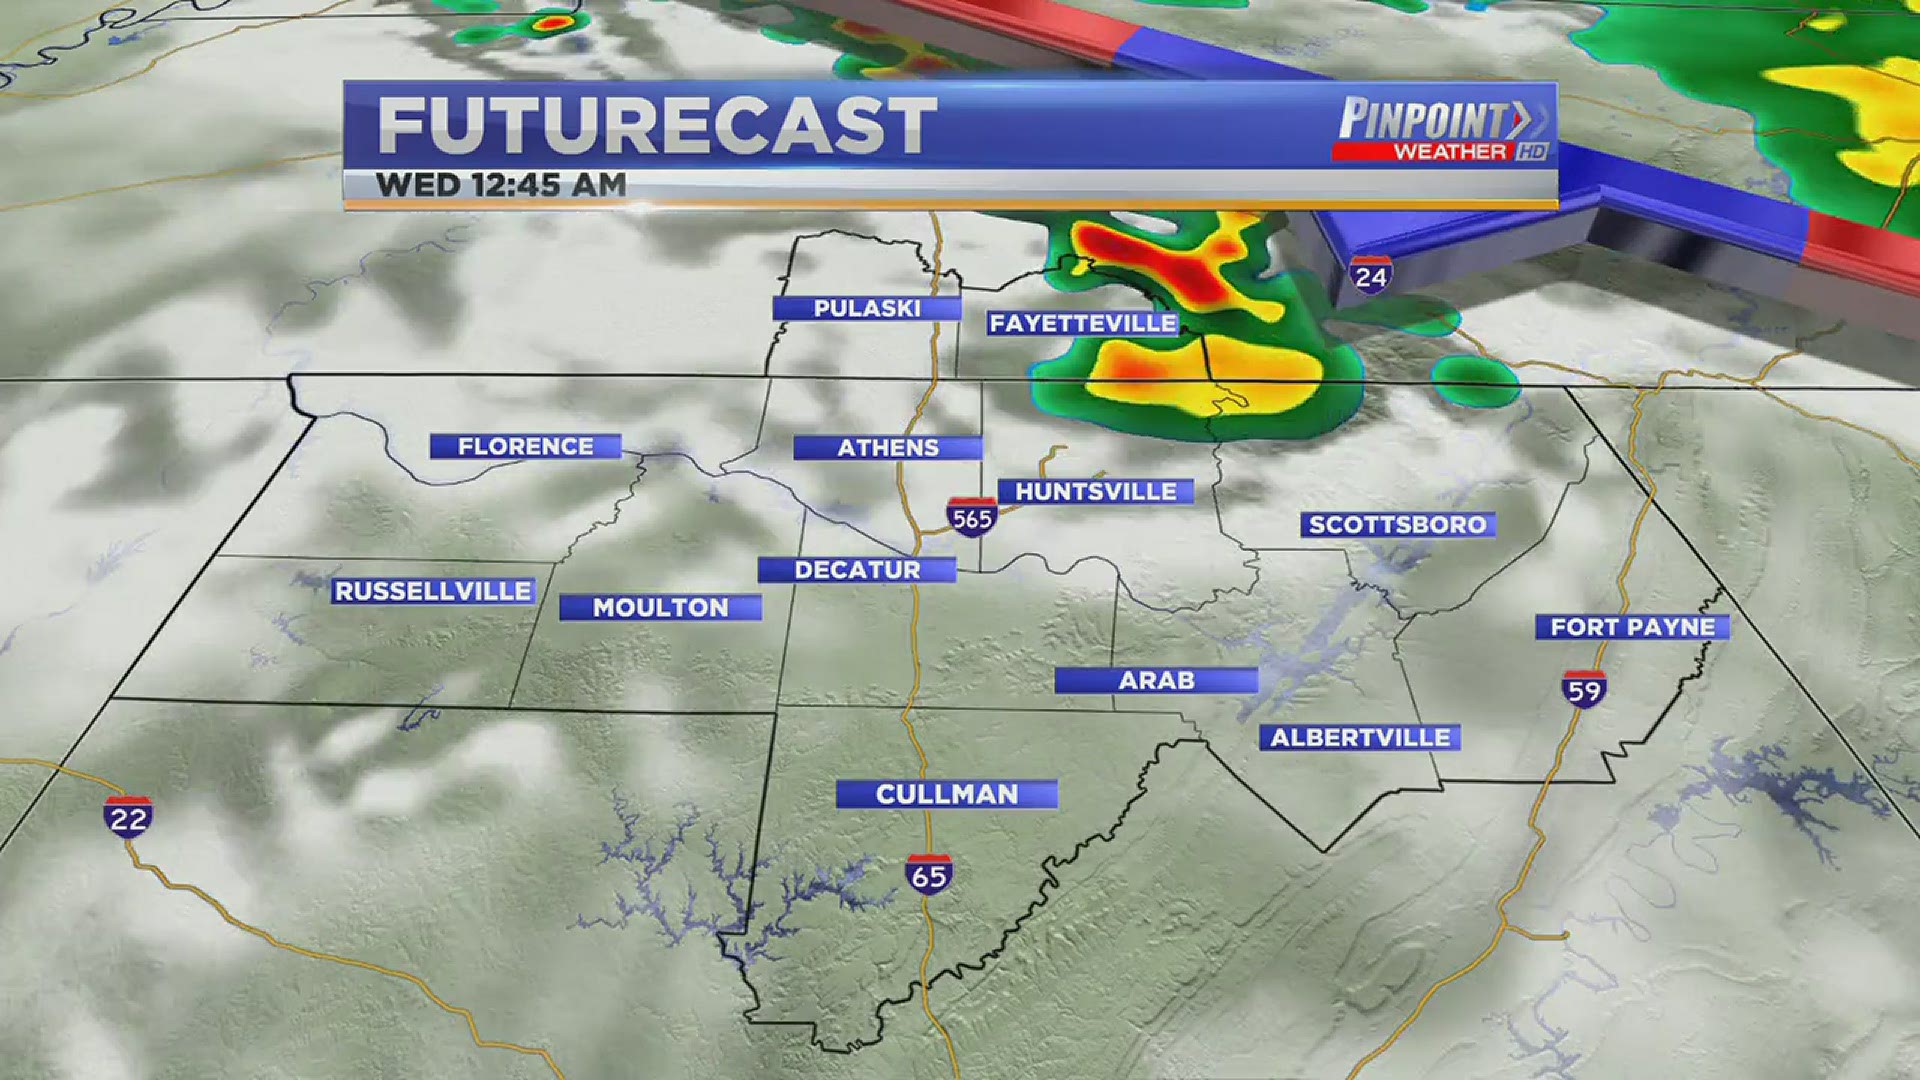 More storms possible on Wednesday